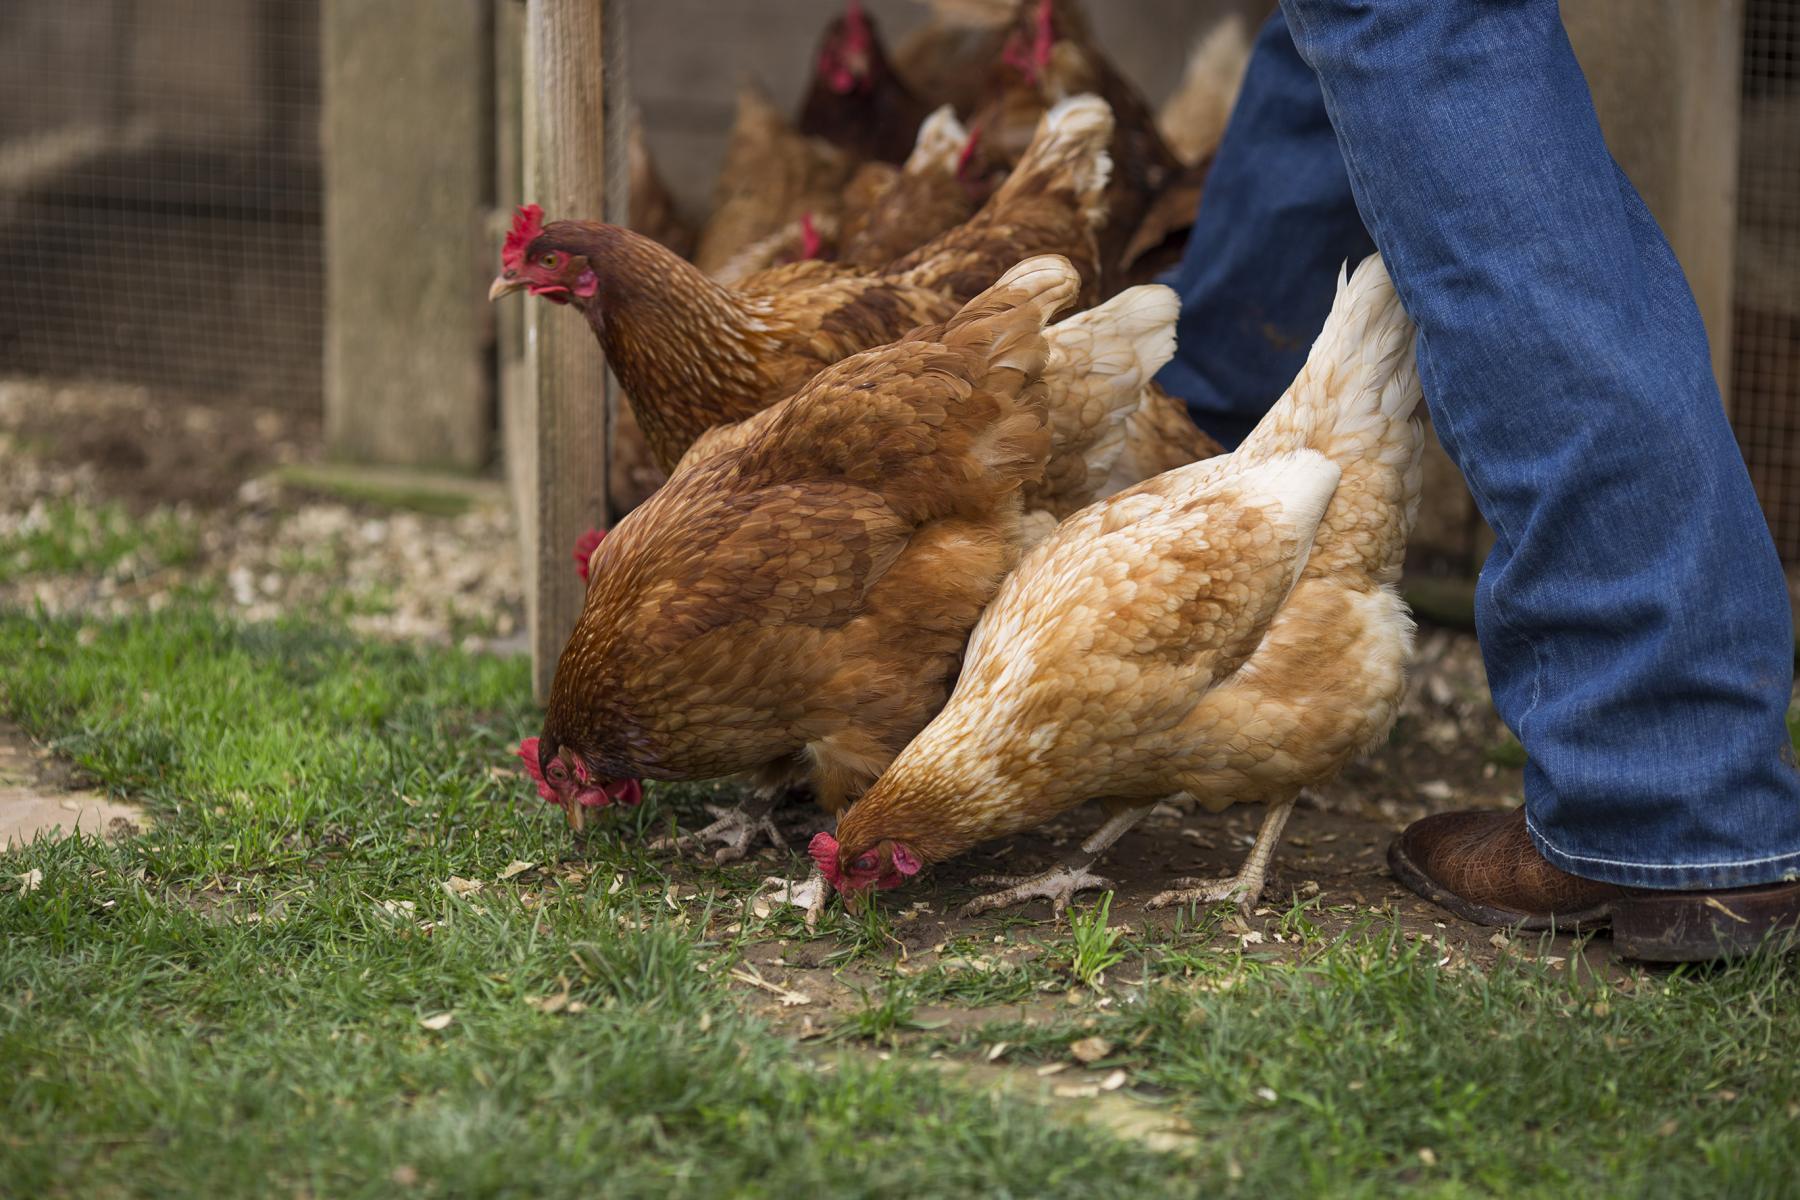 chickens peck at the ground next to a person's boot.